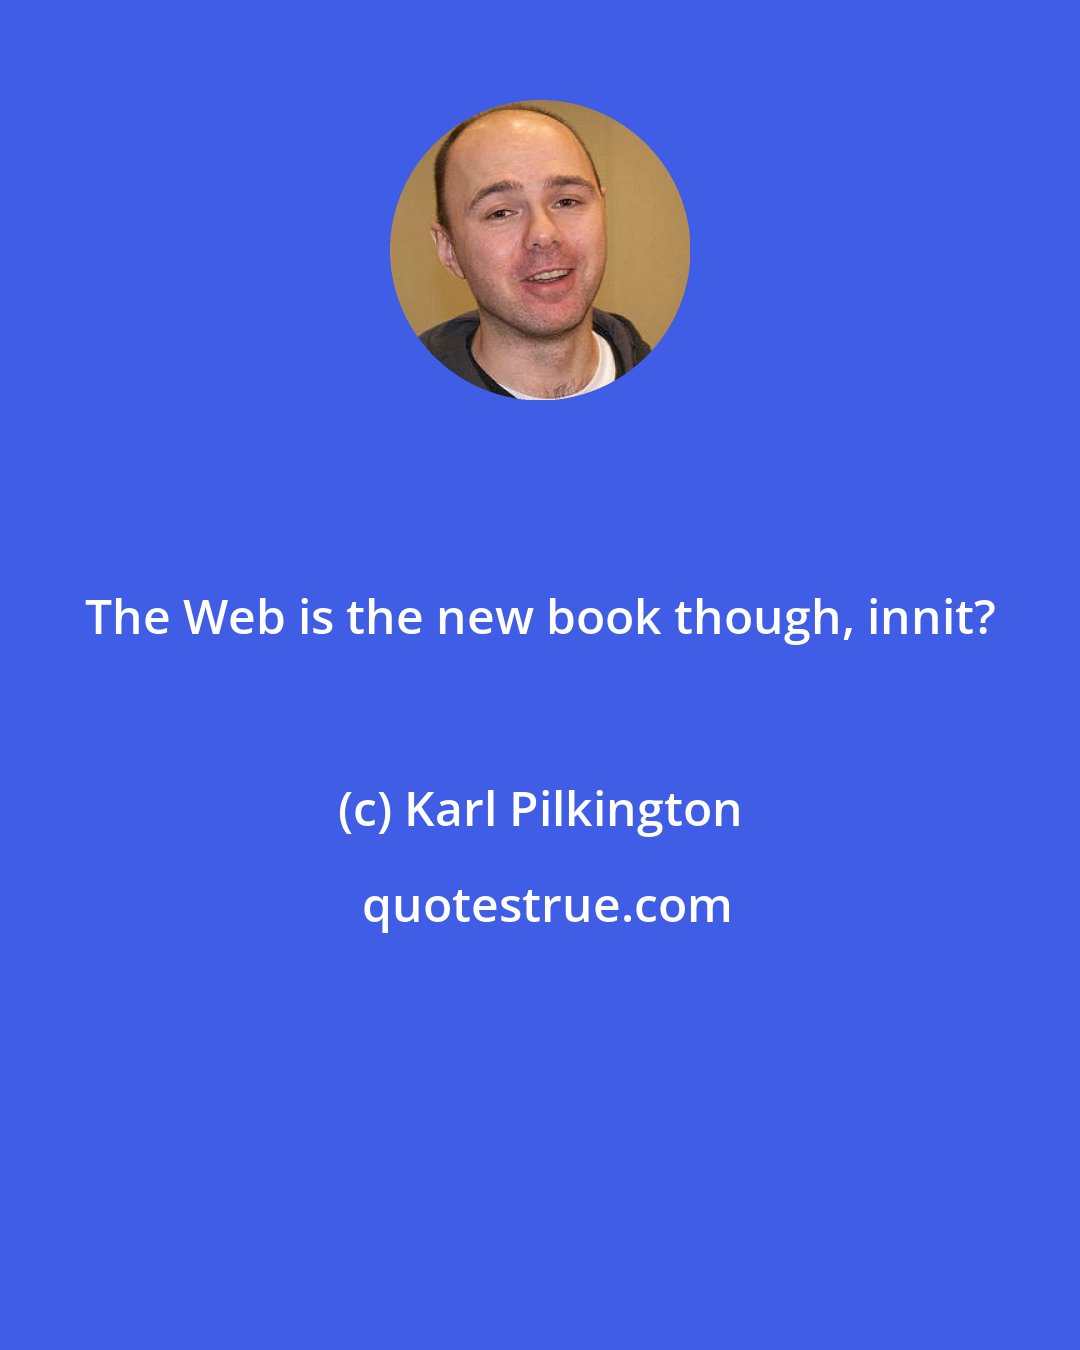 Karl Pilkington: The Web is the new book though, innit?